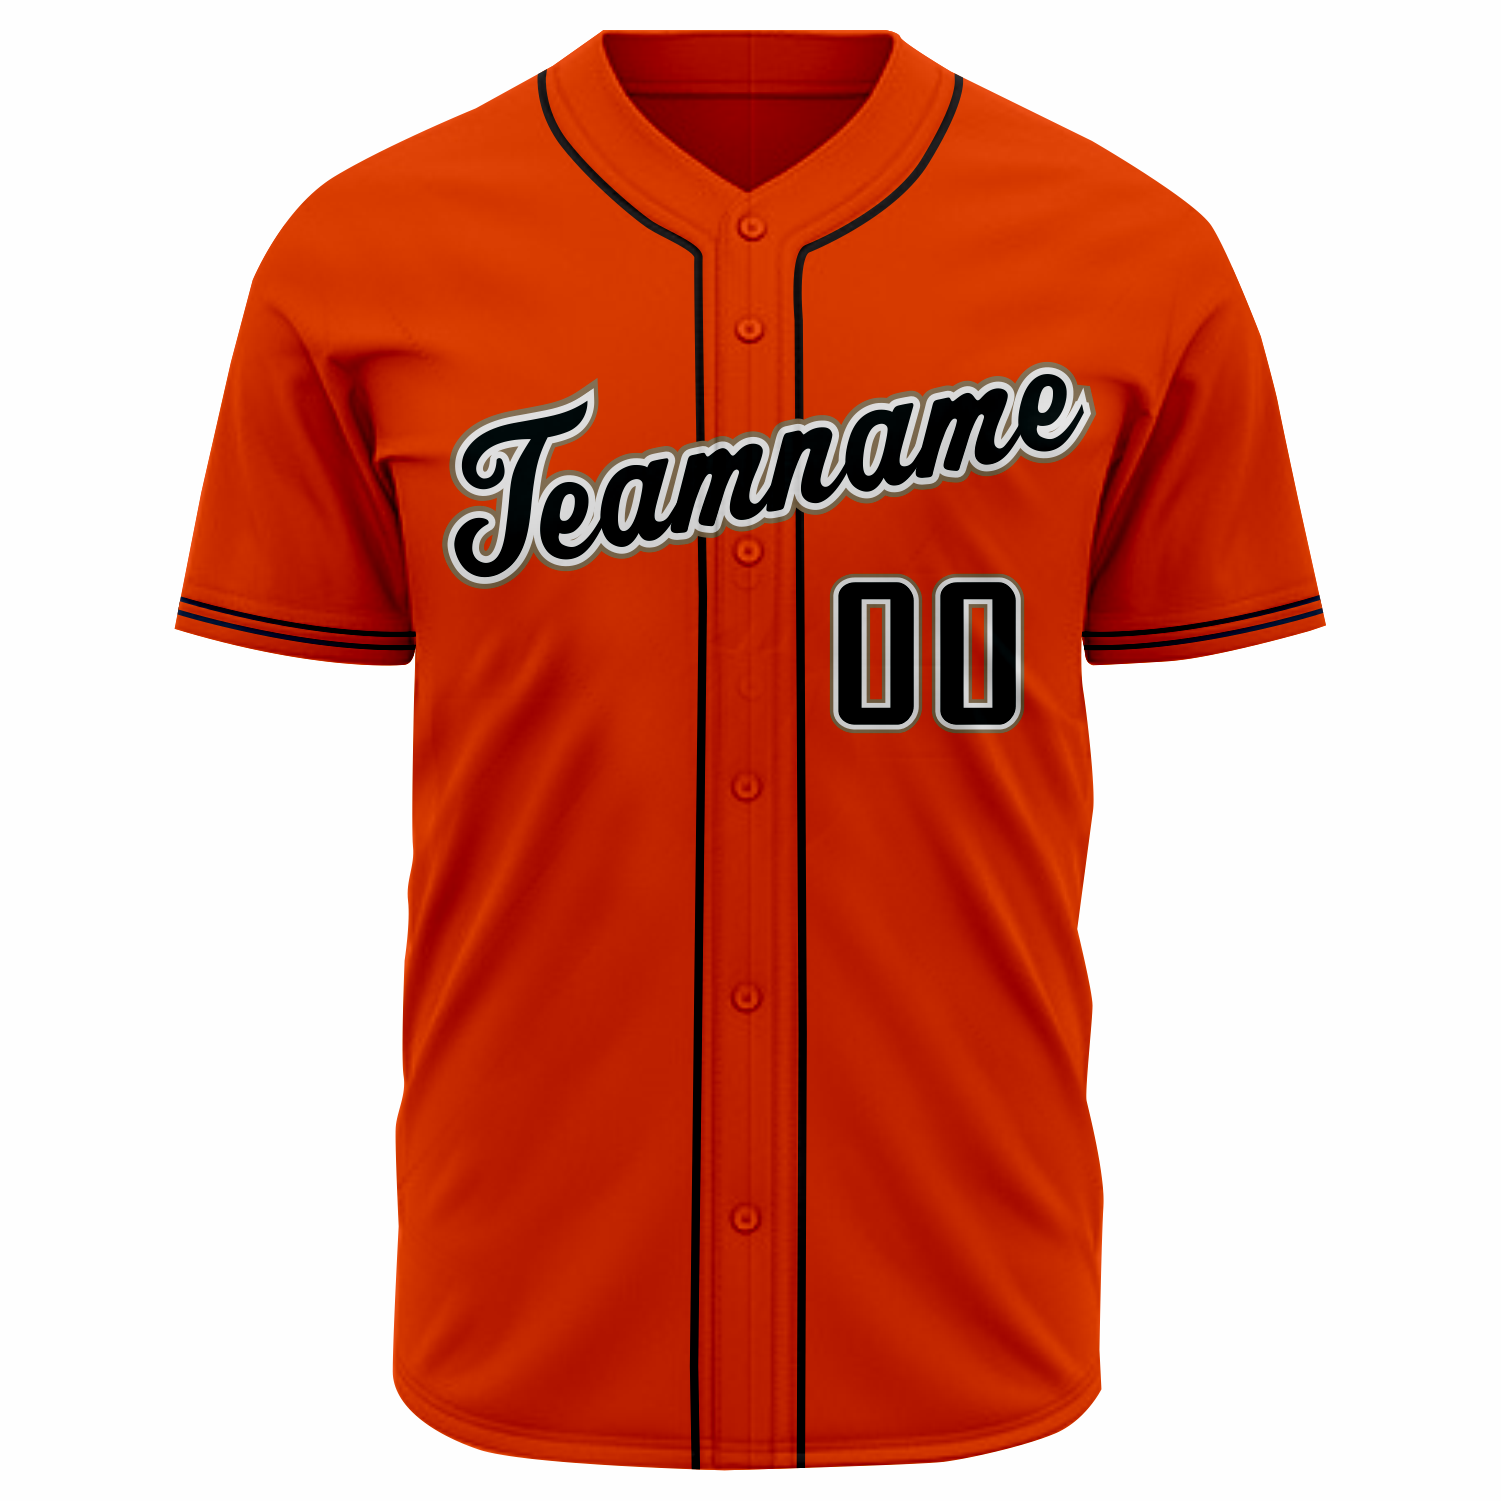 When did they switch jerseys to heat pressed letters and numbers? These  gold jerseys feel so cheap compared to the last ones. : r/Astros